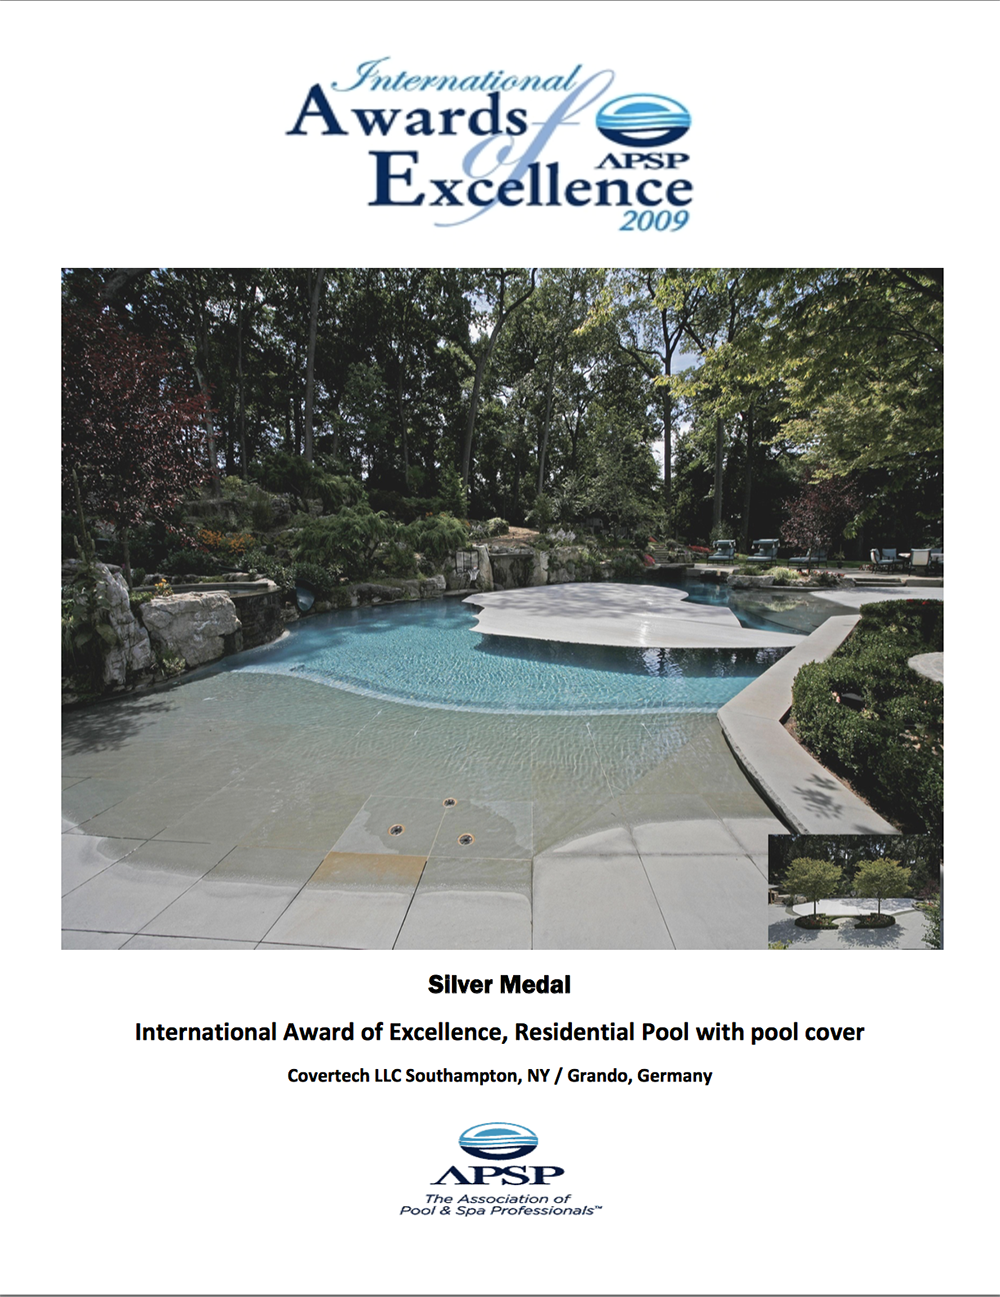 Covertech_SILVER_APSP_International_Award_Res_Pools_with_automatic_pool_cover